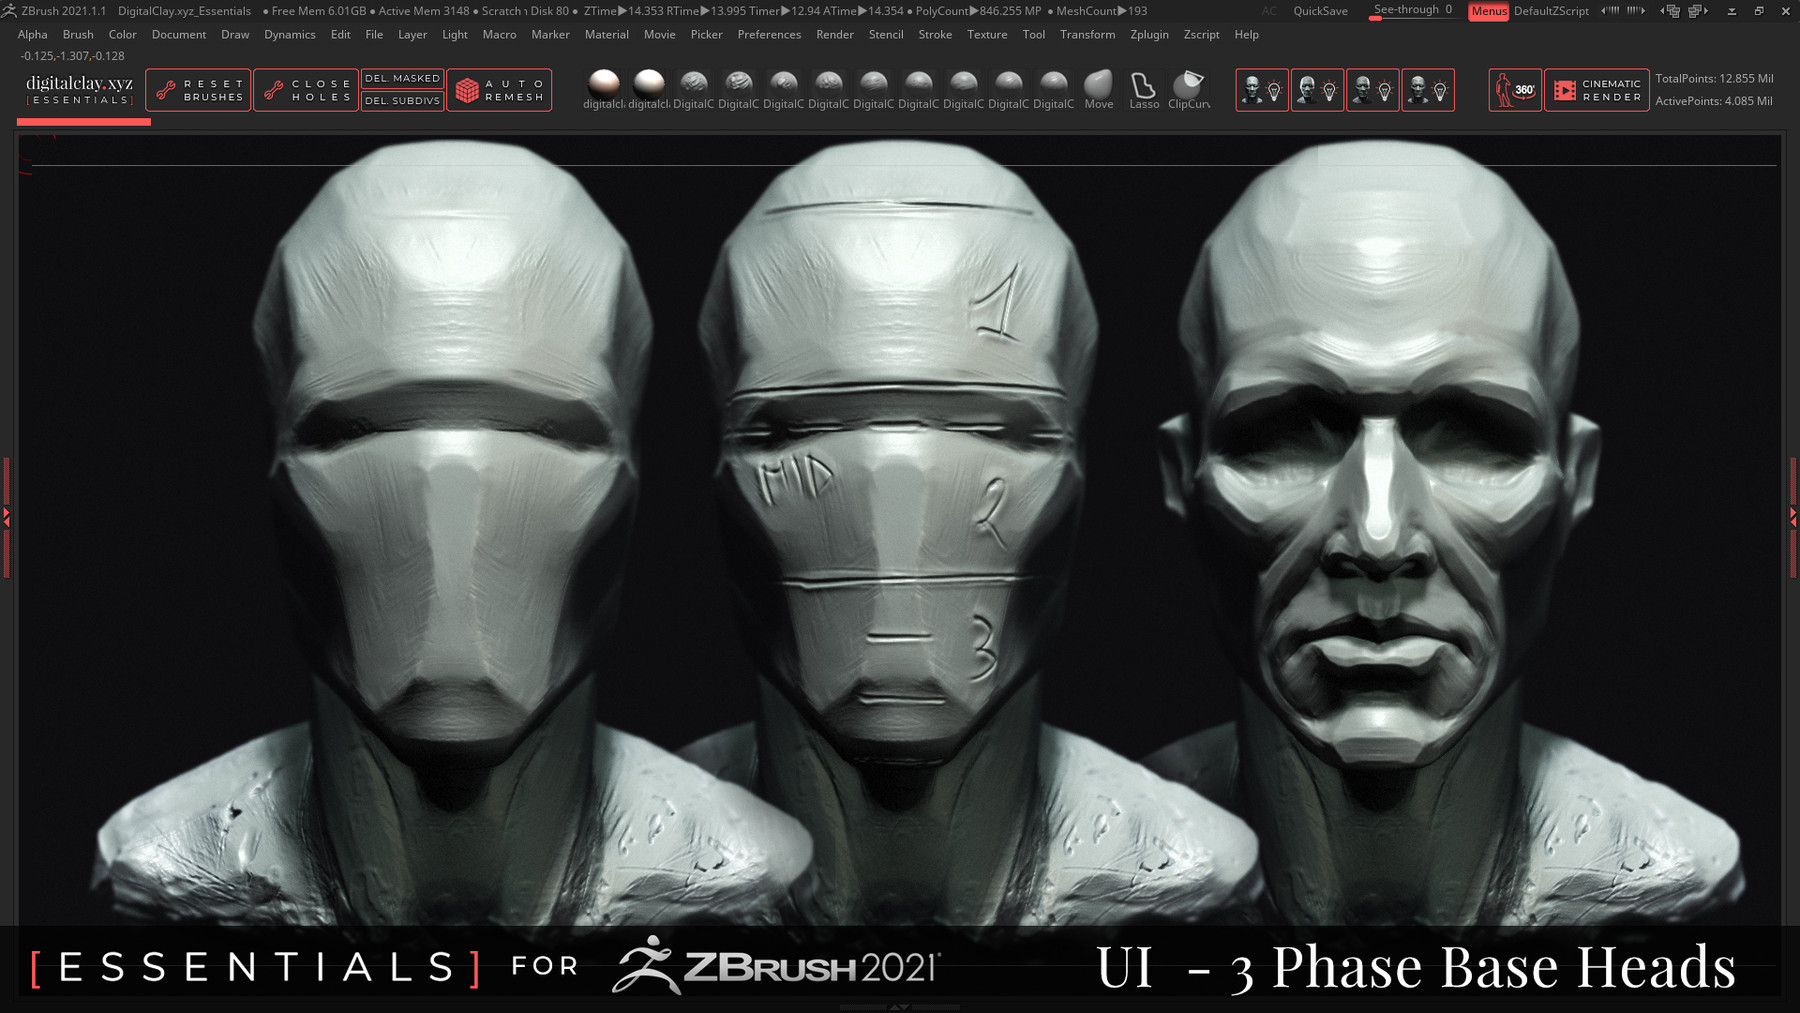 essential books for zbrush artists